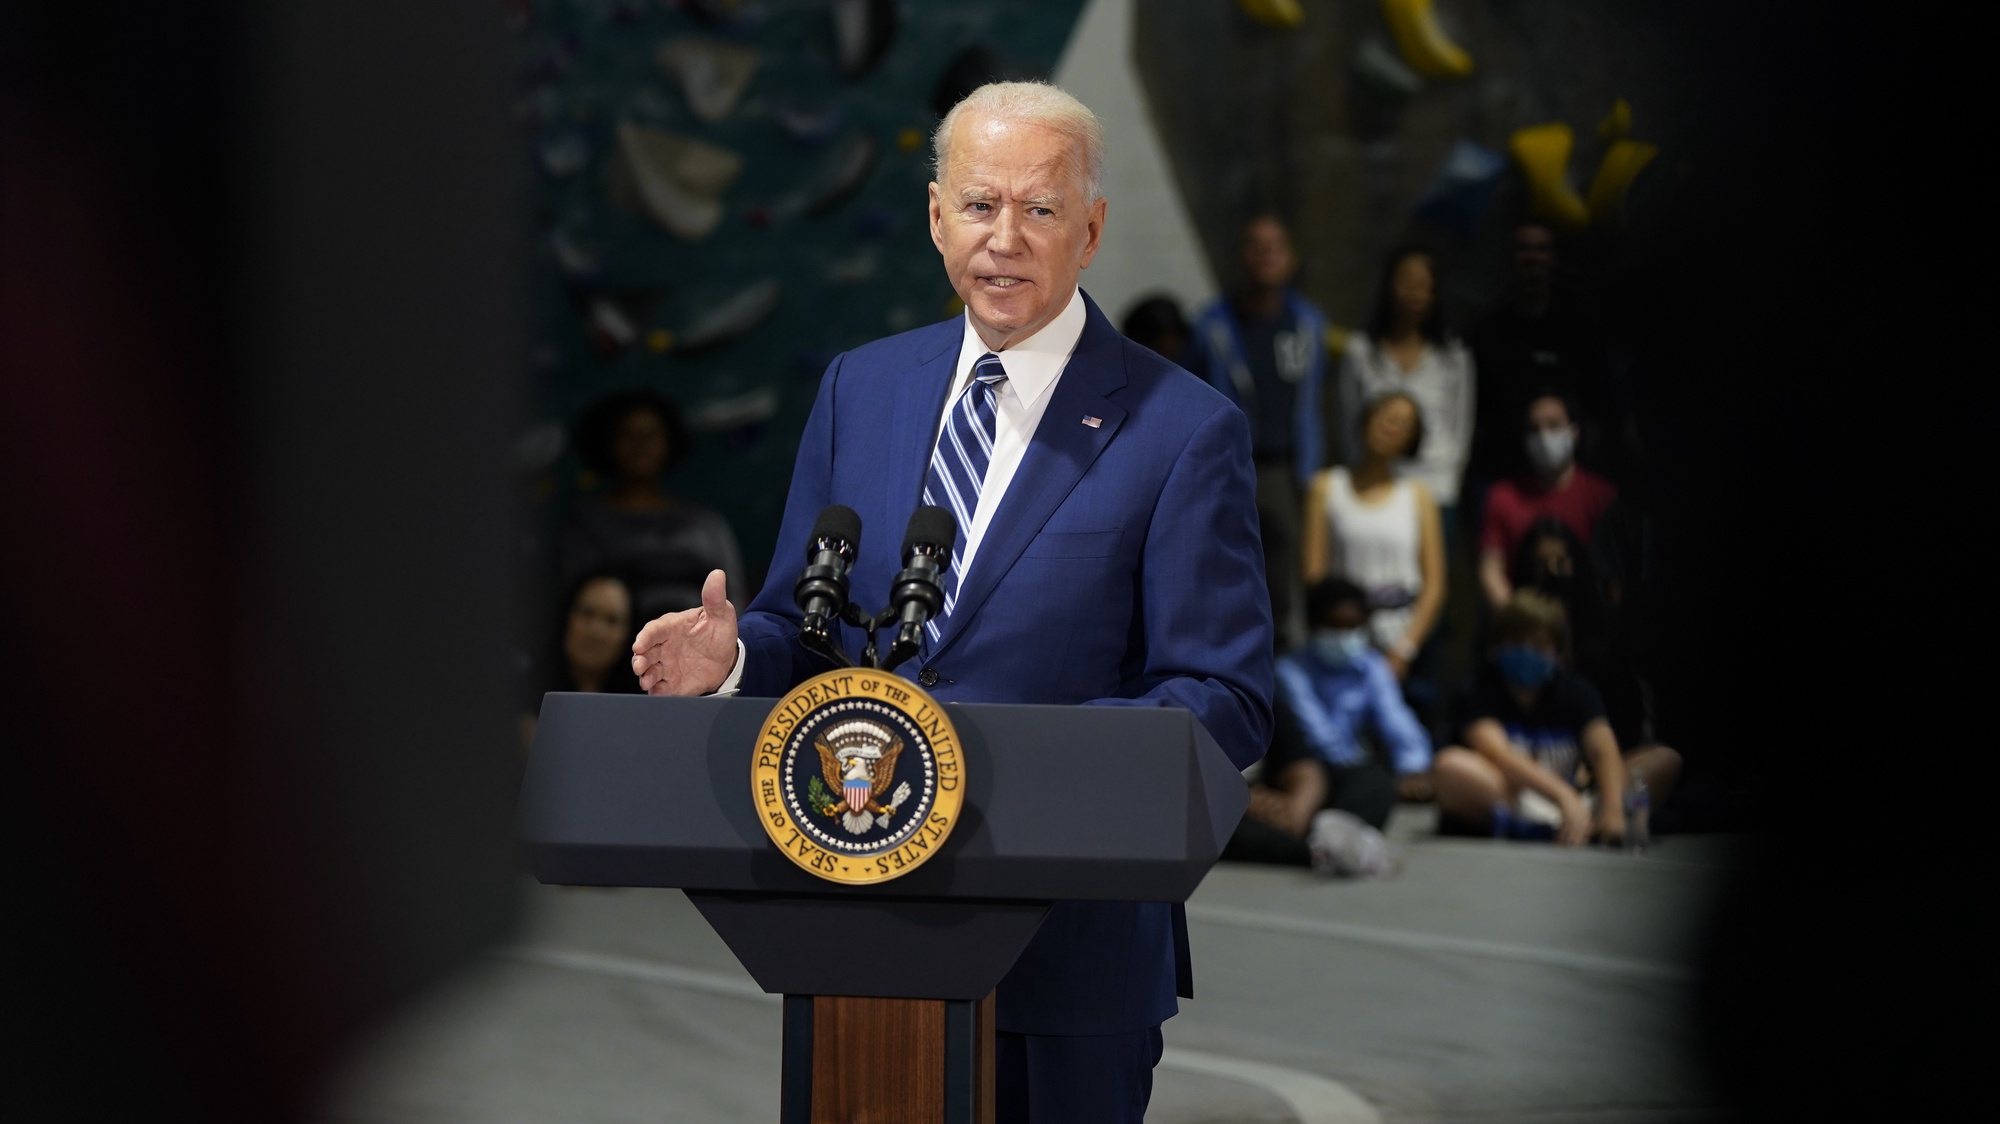 epa09233713 US President Joe Biden delivers remarks at Sportrock Climbing Center in Alexandria, Virginia, USA, 28 May 2021, to celebrate the significant progress Virginia has made in the fight against COVID-19, in partnership with the Biden-Harris Administration.  EPA/Chris Kleponis / POOL